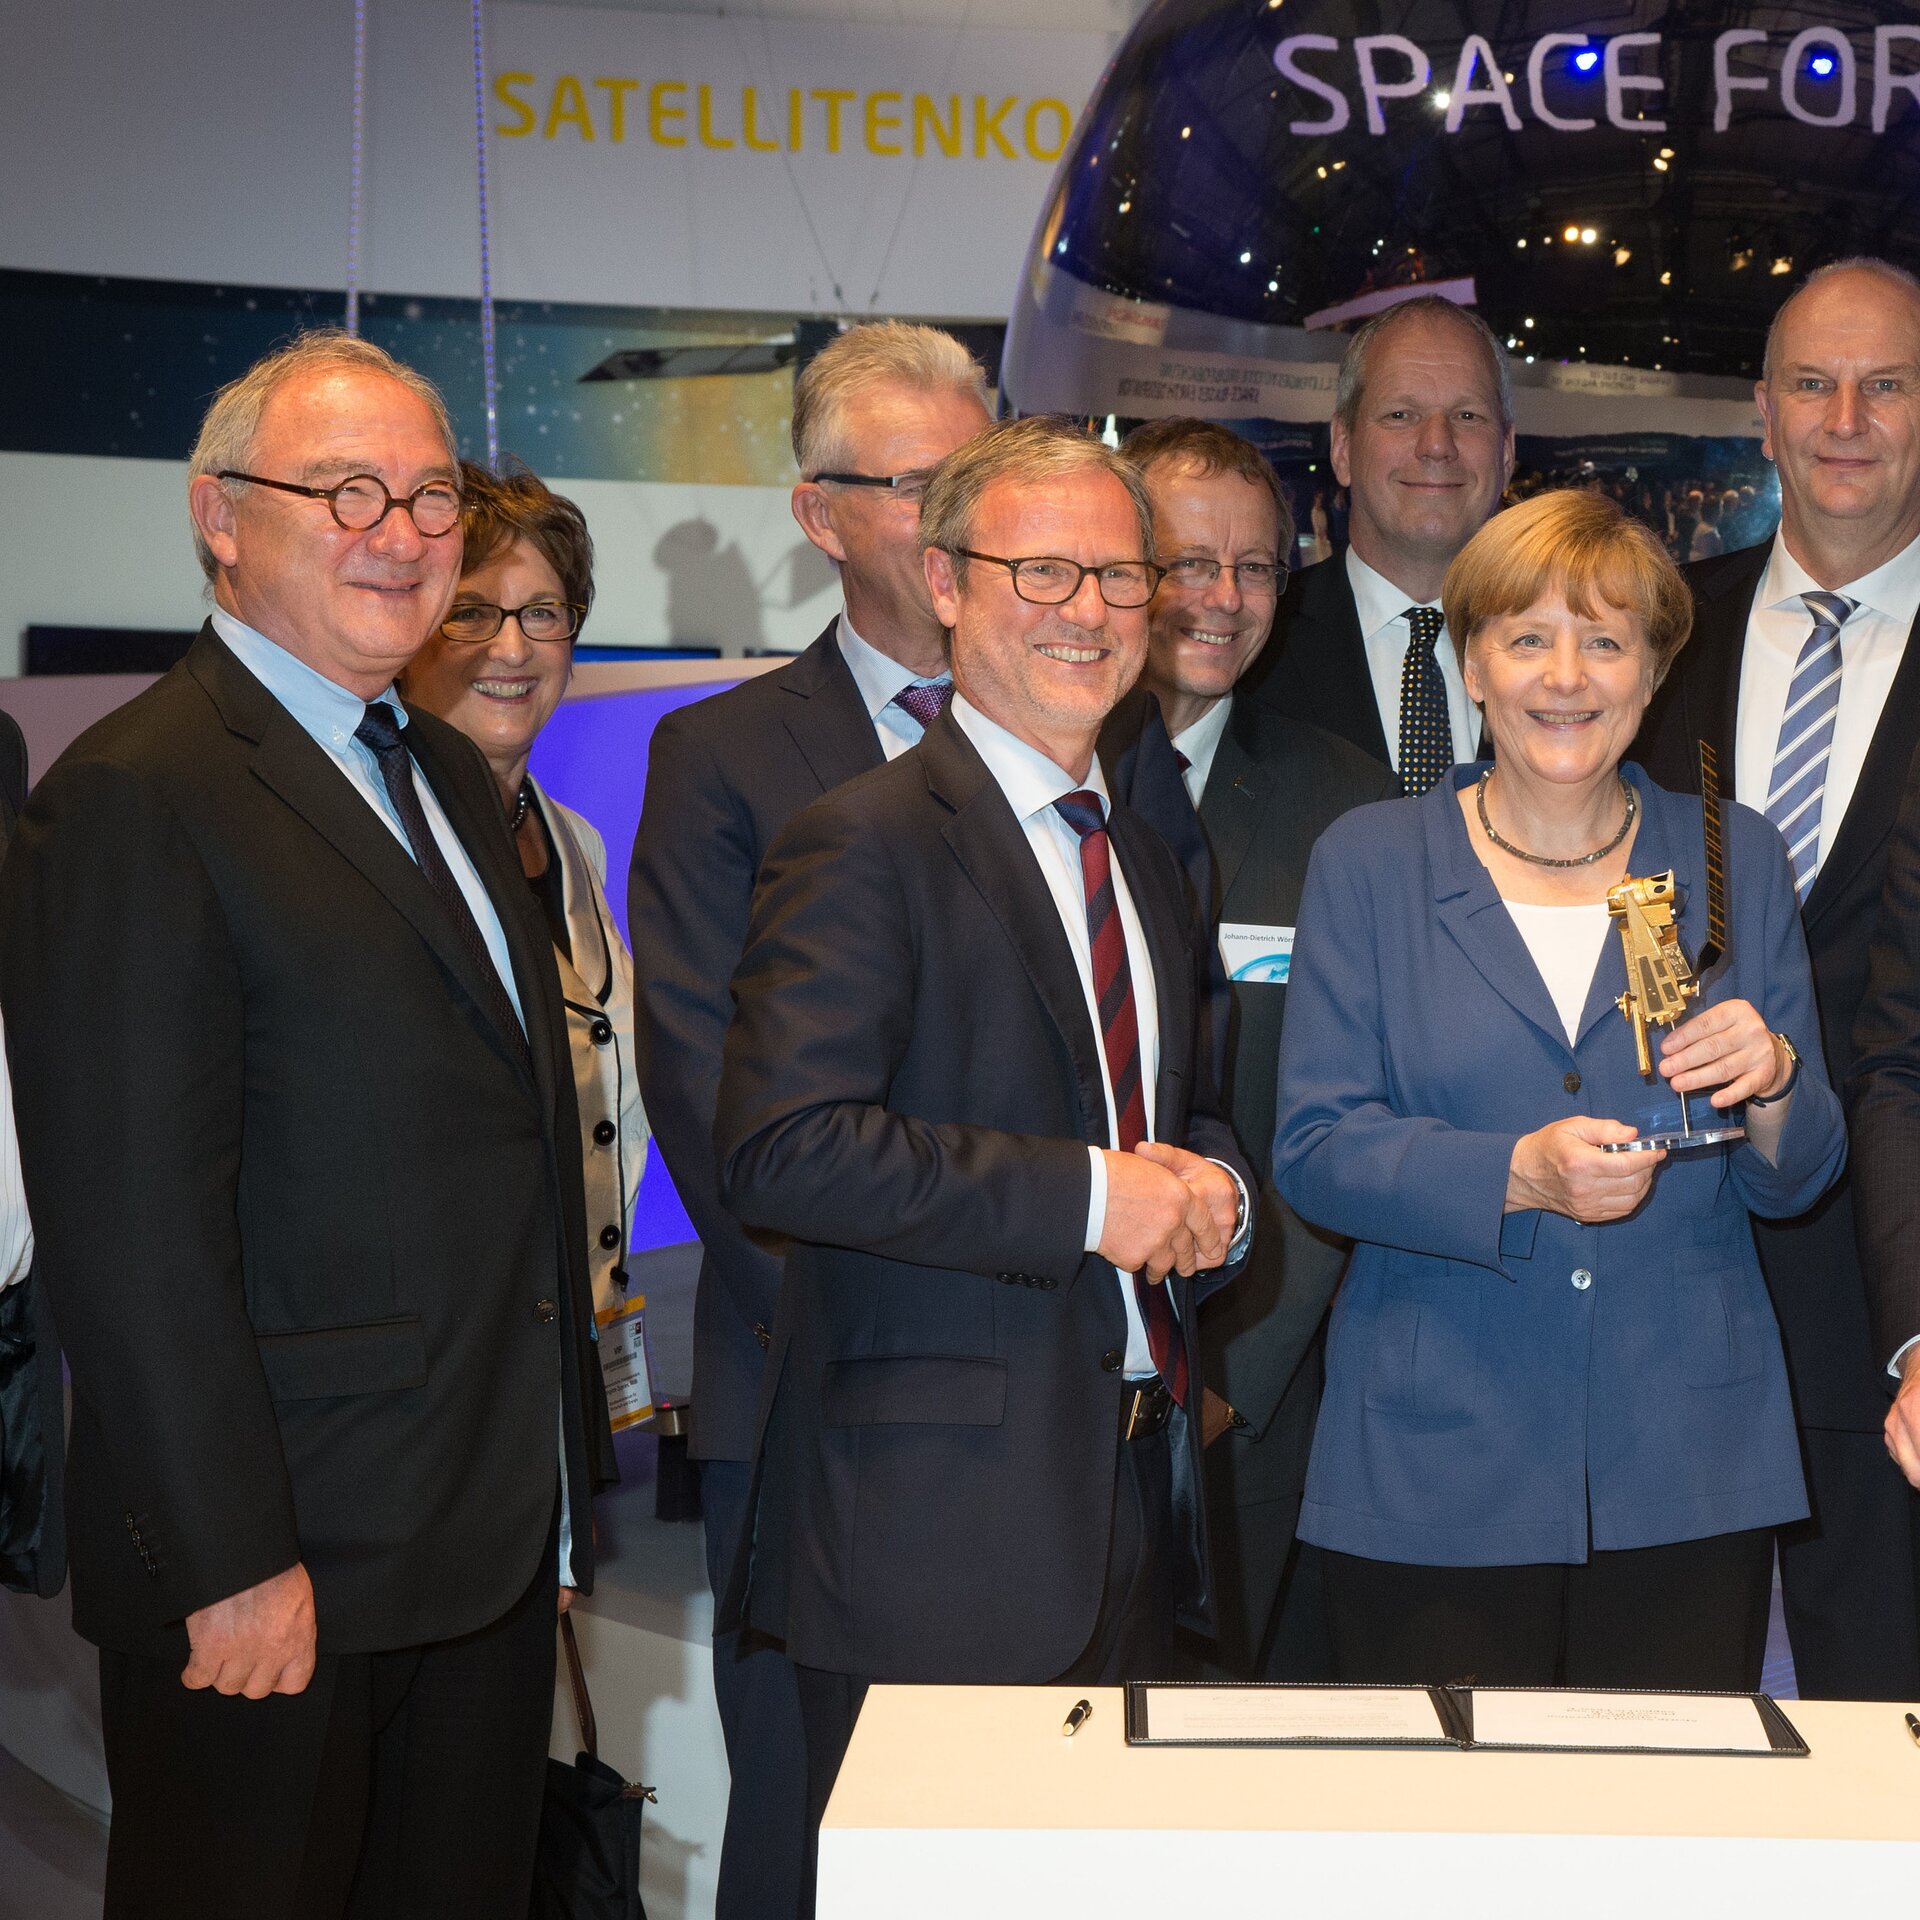 Angela Merkel at the ‘Space for Earth’ space pavilion at ILA